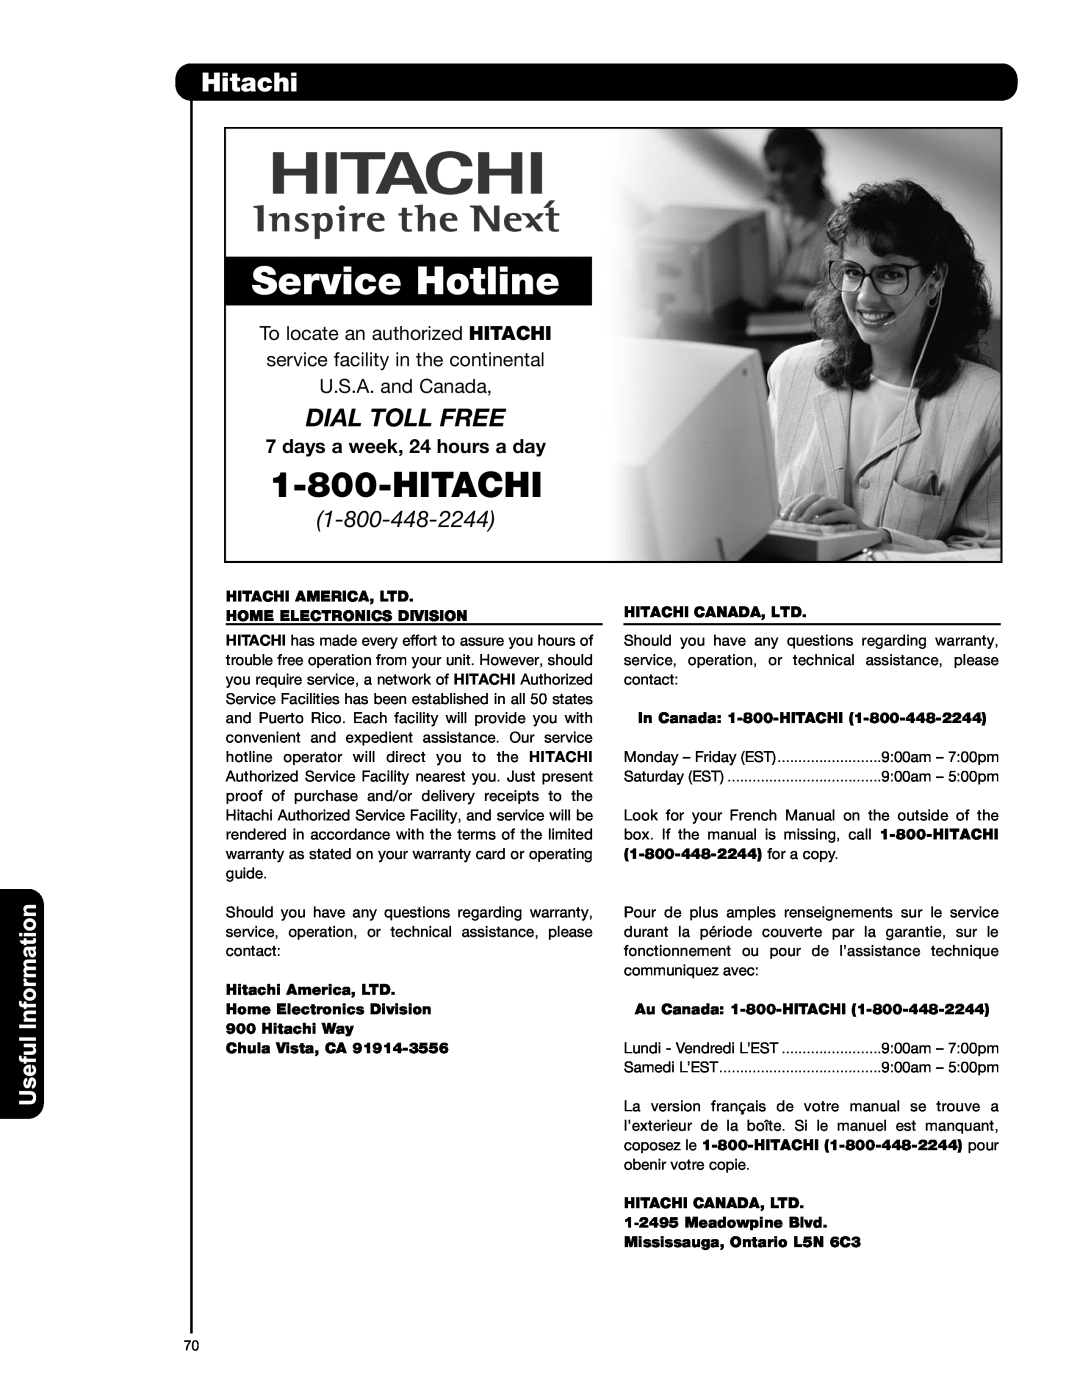 Hitachi P42T501 Useful, days a week, 24 hours a day, Service Hotline, Dial Toll Free, Information, Hitachi Way 